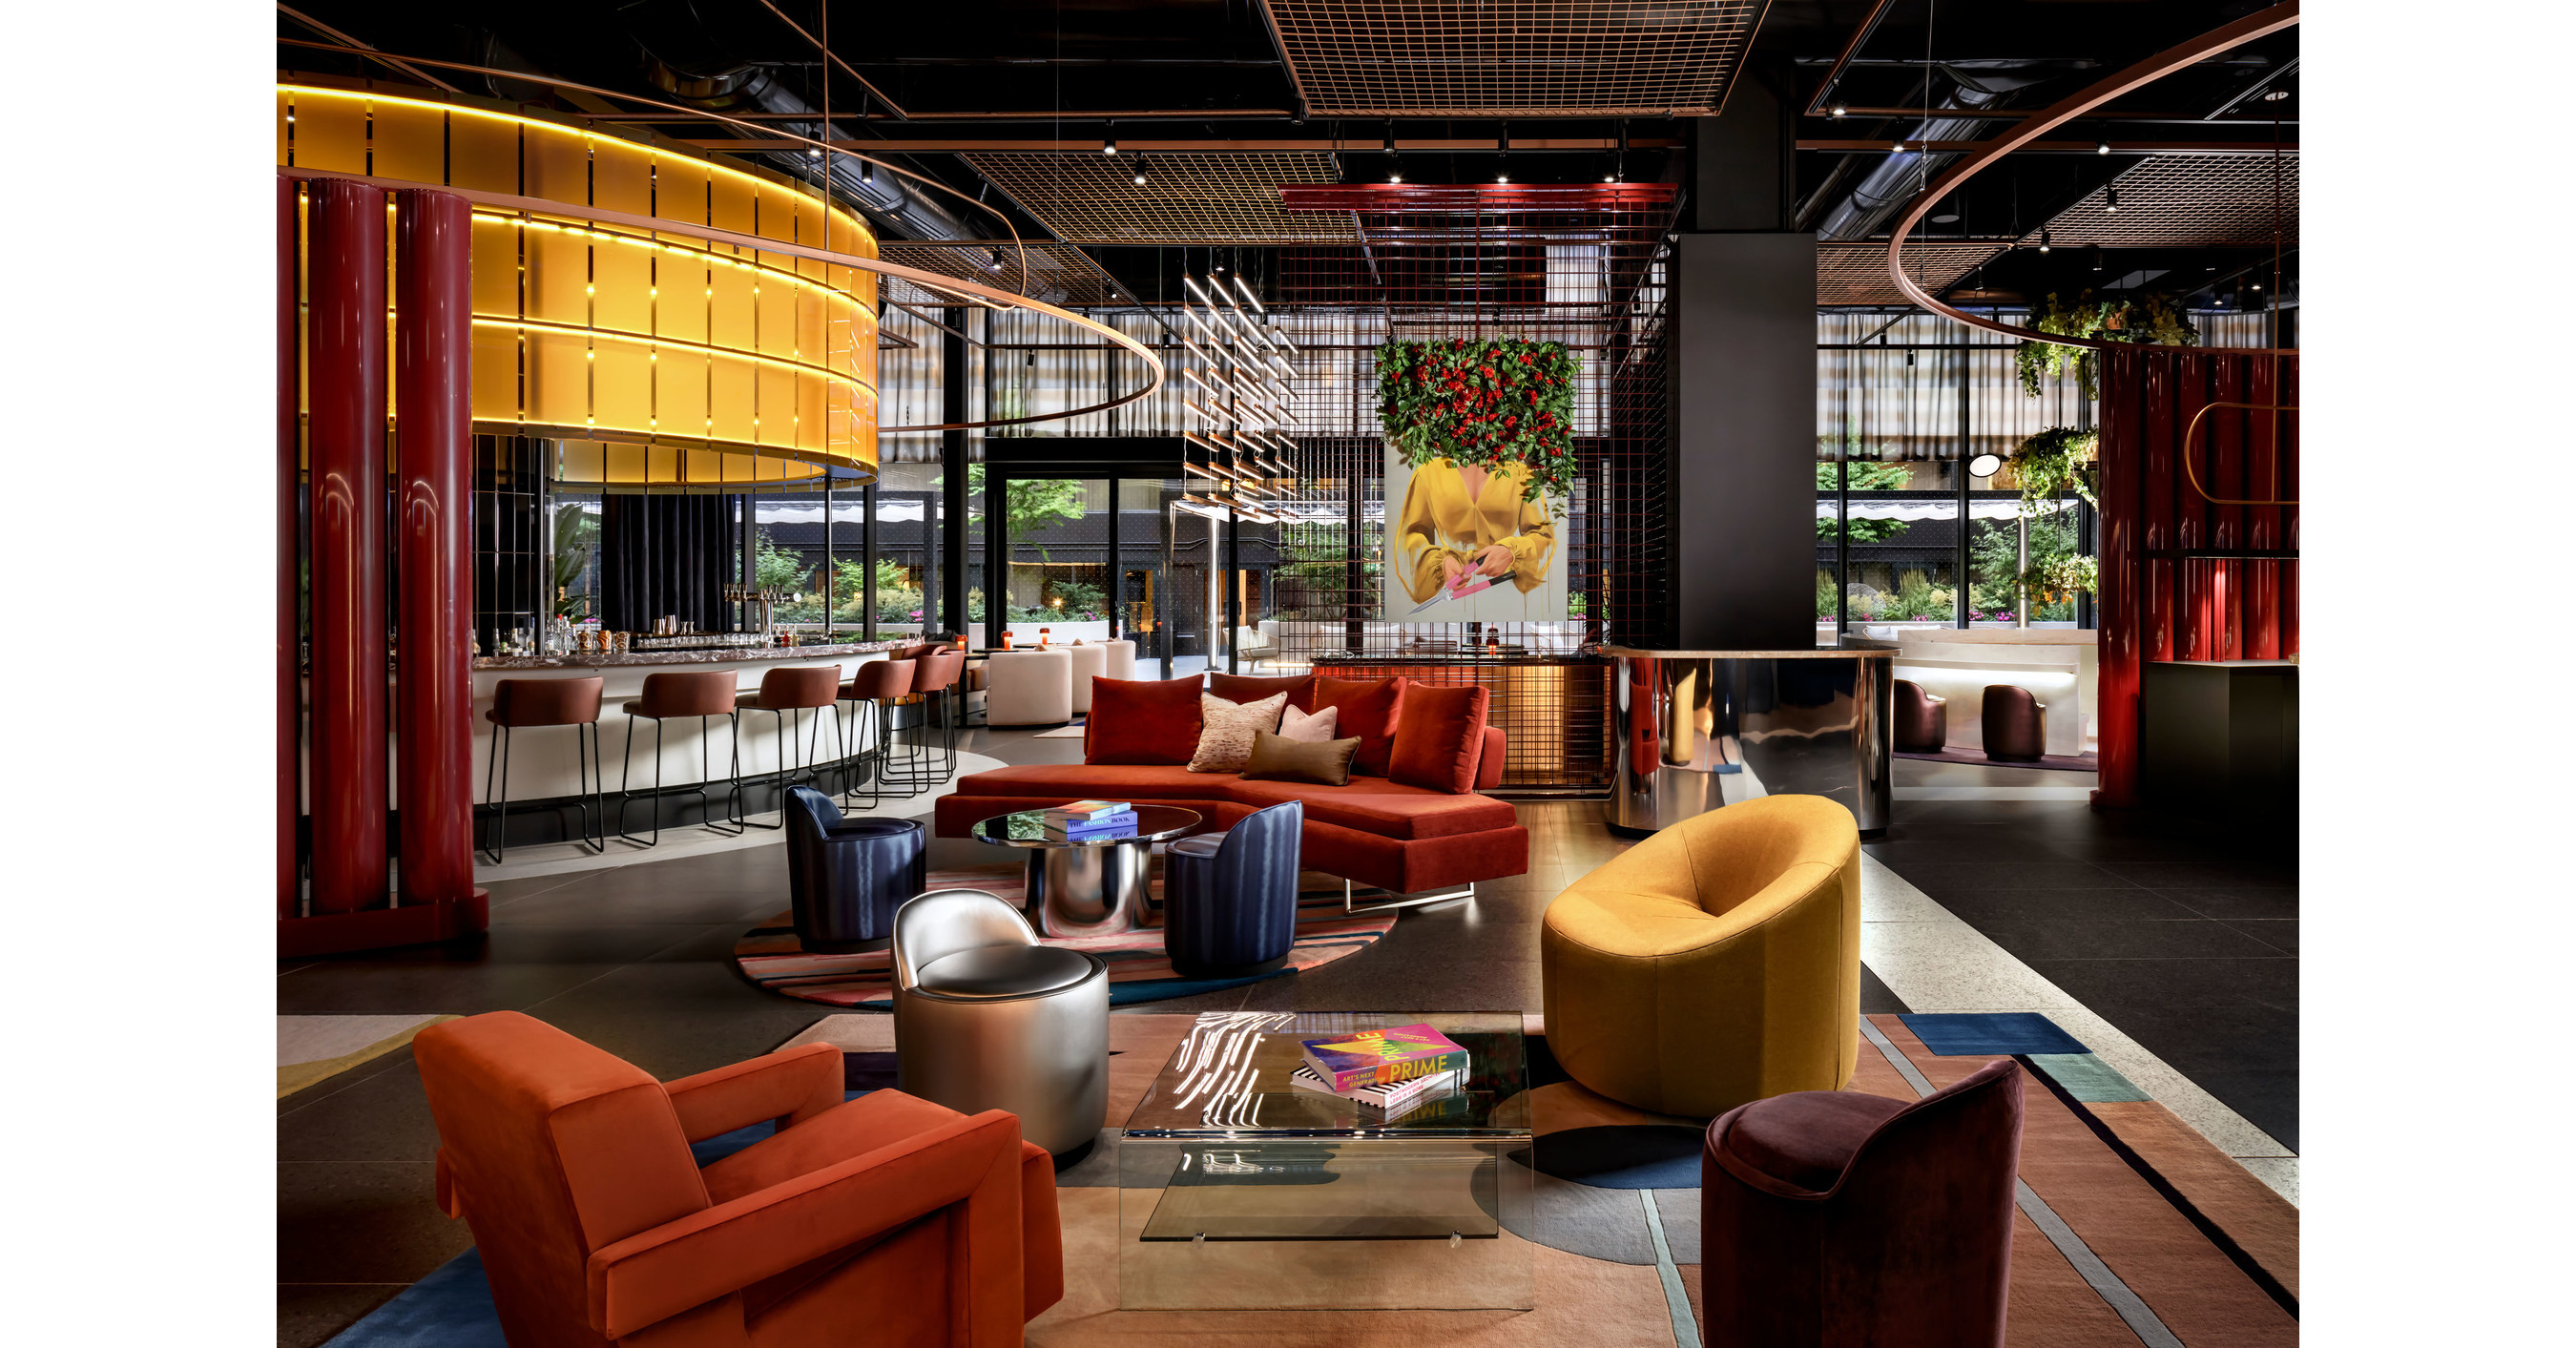 W HOTELS INFUSES A NEW WAVE OF ENERGY INTO CANADA’S BIGGEST CITY WITH THE OPENING OF W TORONTO